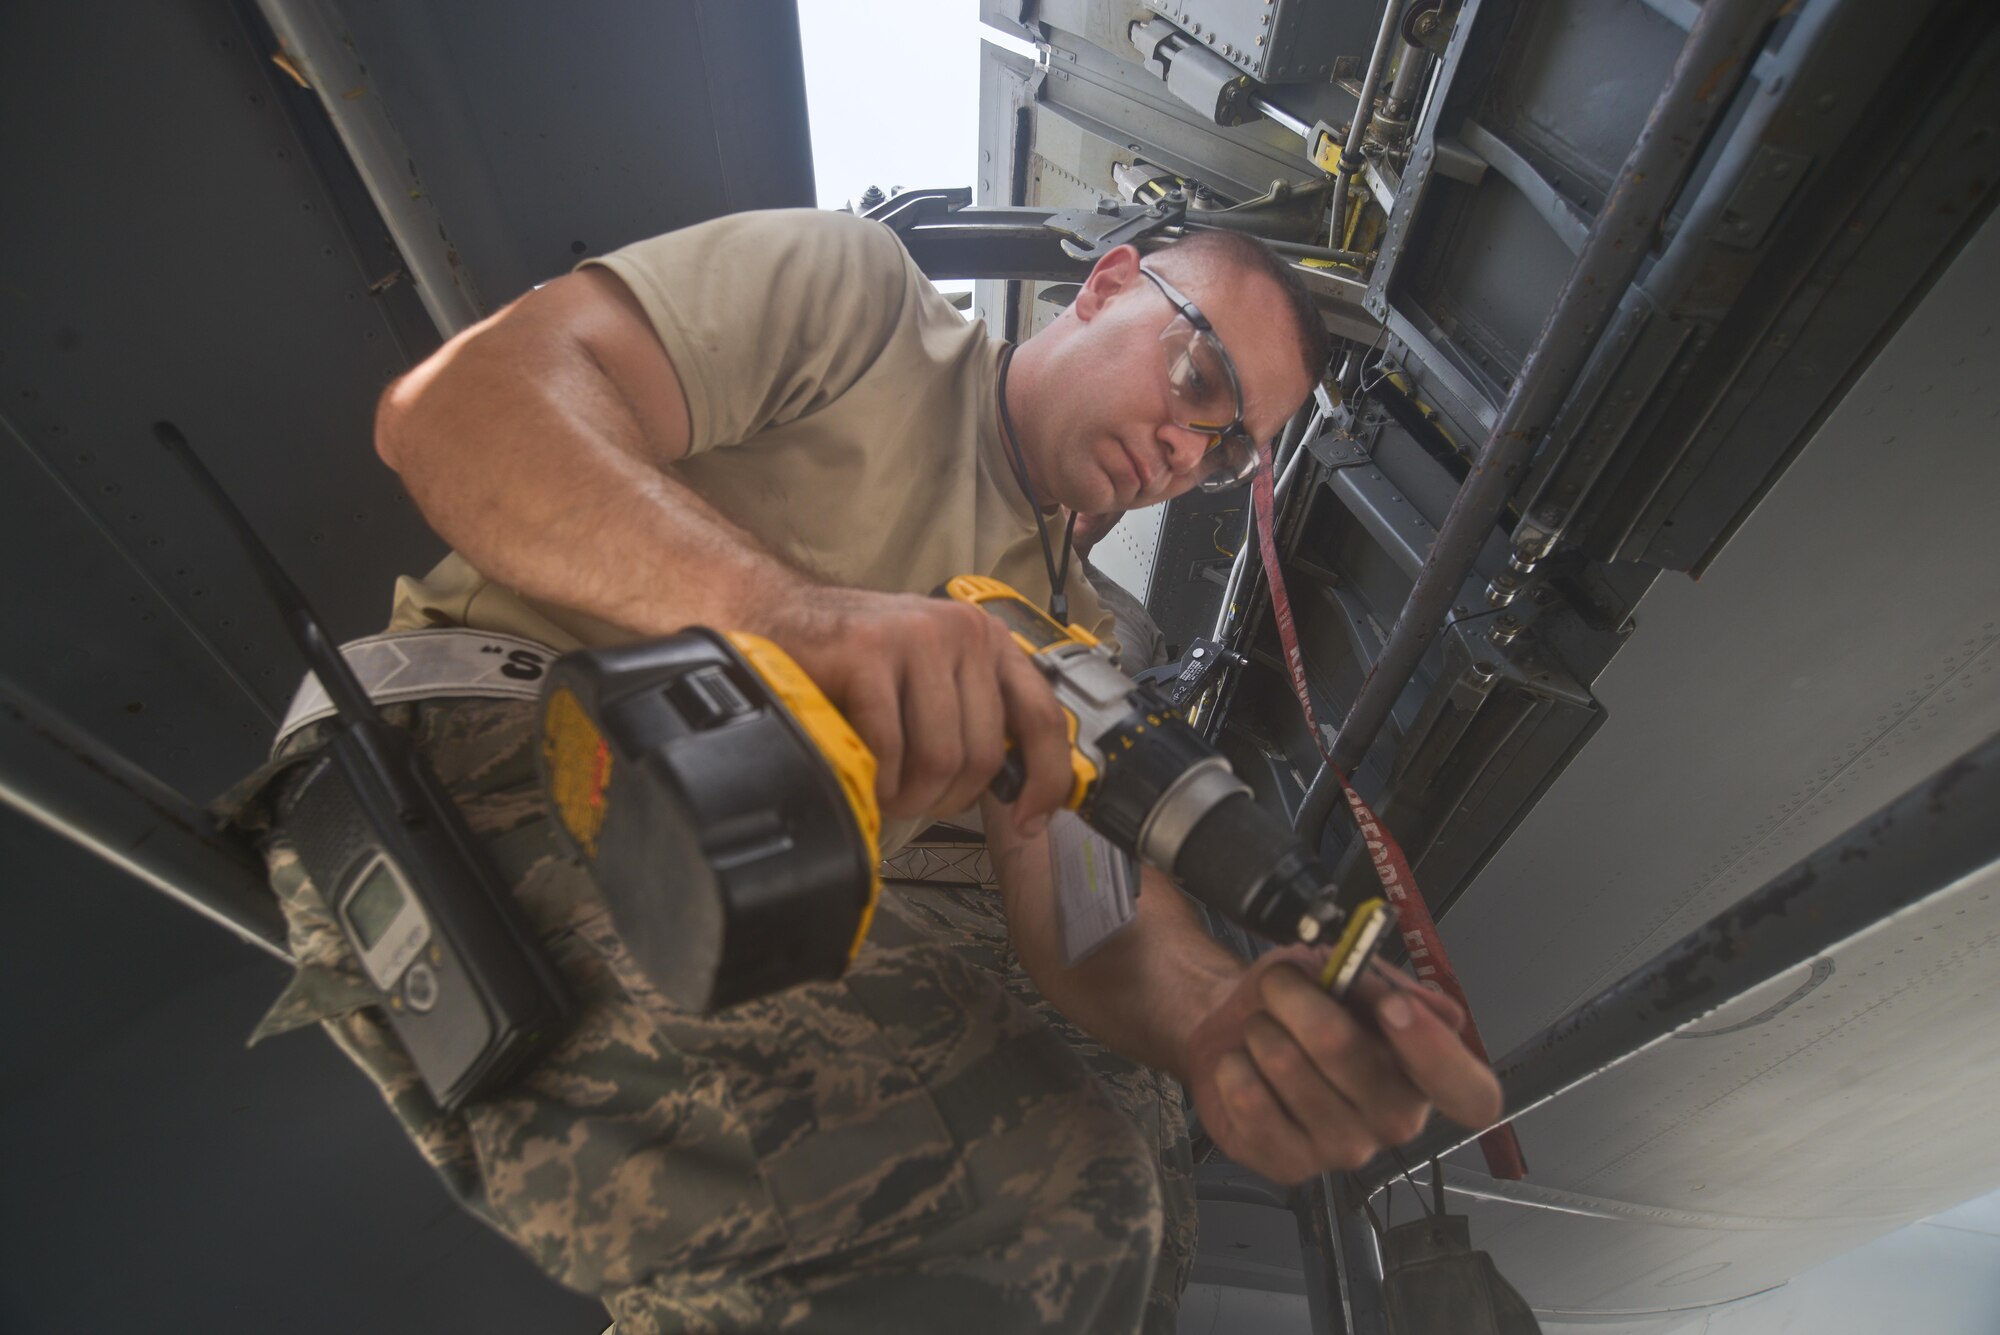 Staff Sgt. David Clark, 379th Expeditionary Maintenance Squadron's fabrication flight, adjusts his drill-bit to match the exact size of rivet needed to repair a KC-135 Stratotanker access panel August 4, 2015 at Al Udeid Air Base, Qatar. The fabrications flight is partitioned into the aircraft structural maintenance and metal technology sections that make on-site repairs to aircraft deployed to Al Udeid. Most fabrications can be conducted on the flight line. For others, Airmen would bring in the part or create what is needed to keep the aircraft flying within hours. (U.S. Air Force photo/ Staff Sgt. Alexandre Montes)